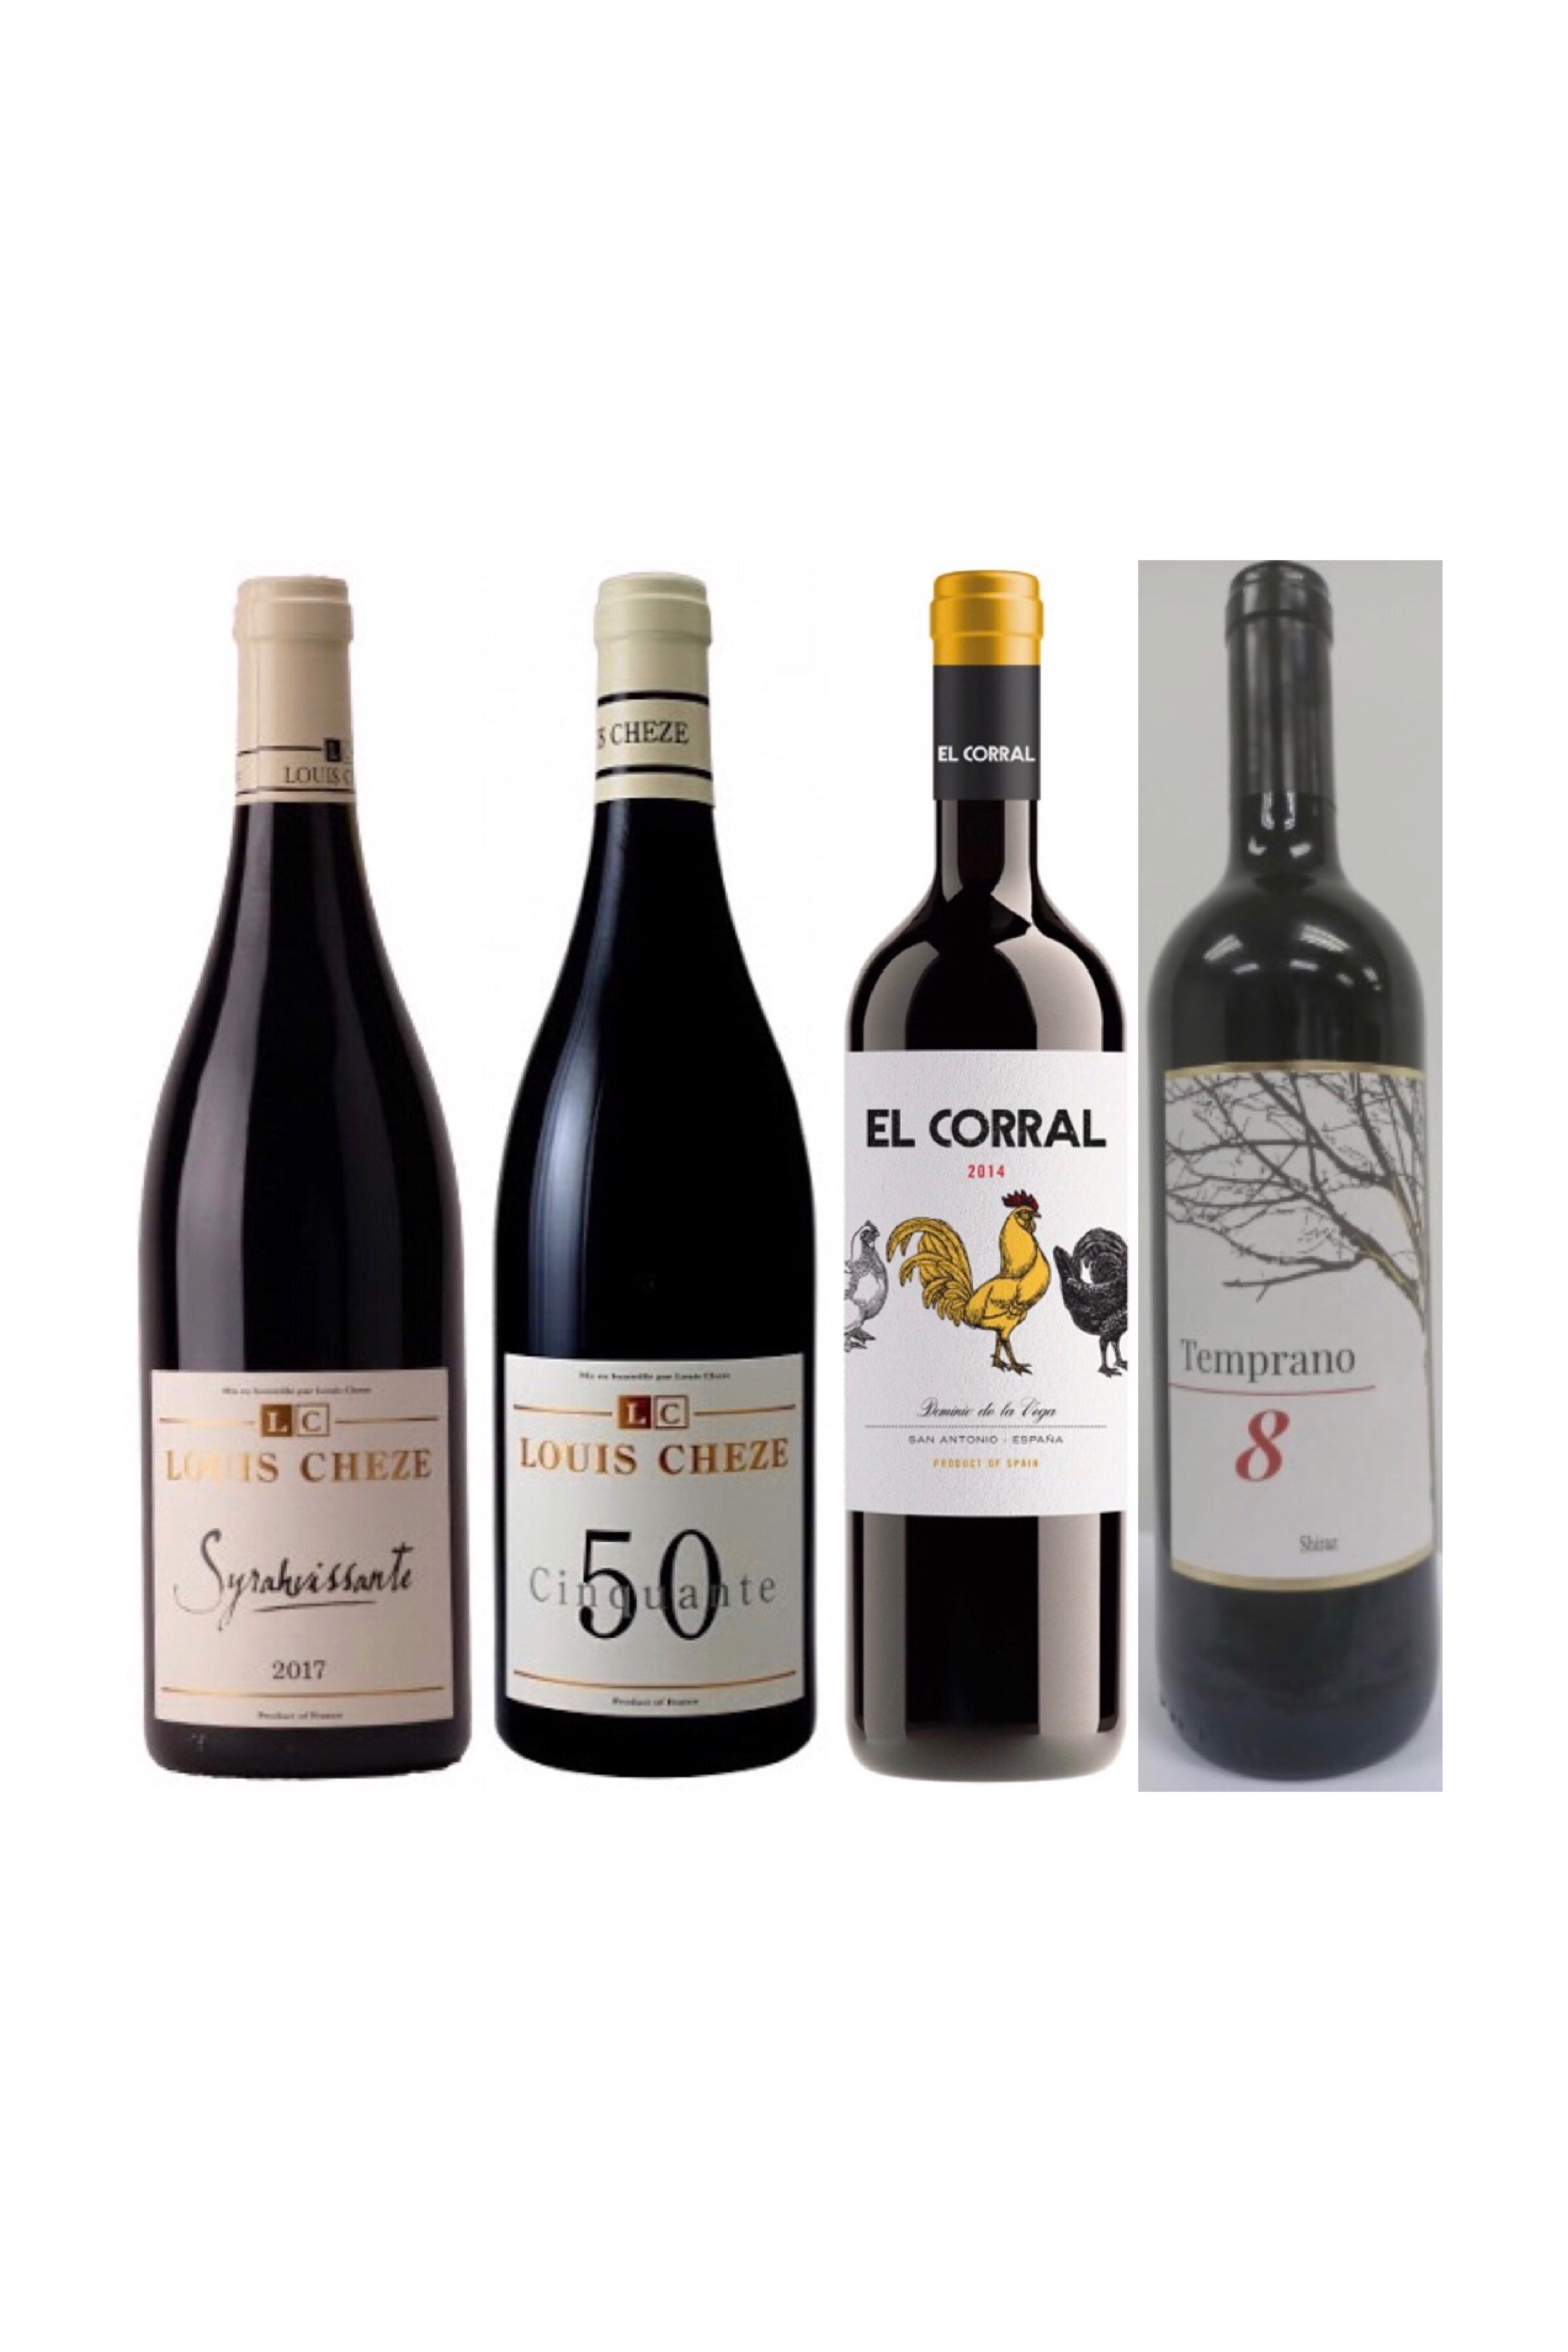 Special Offer for Facebook Participants only! More than 50% off for any 4 bottles of Wine!